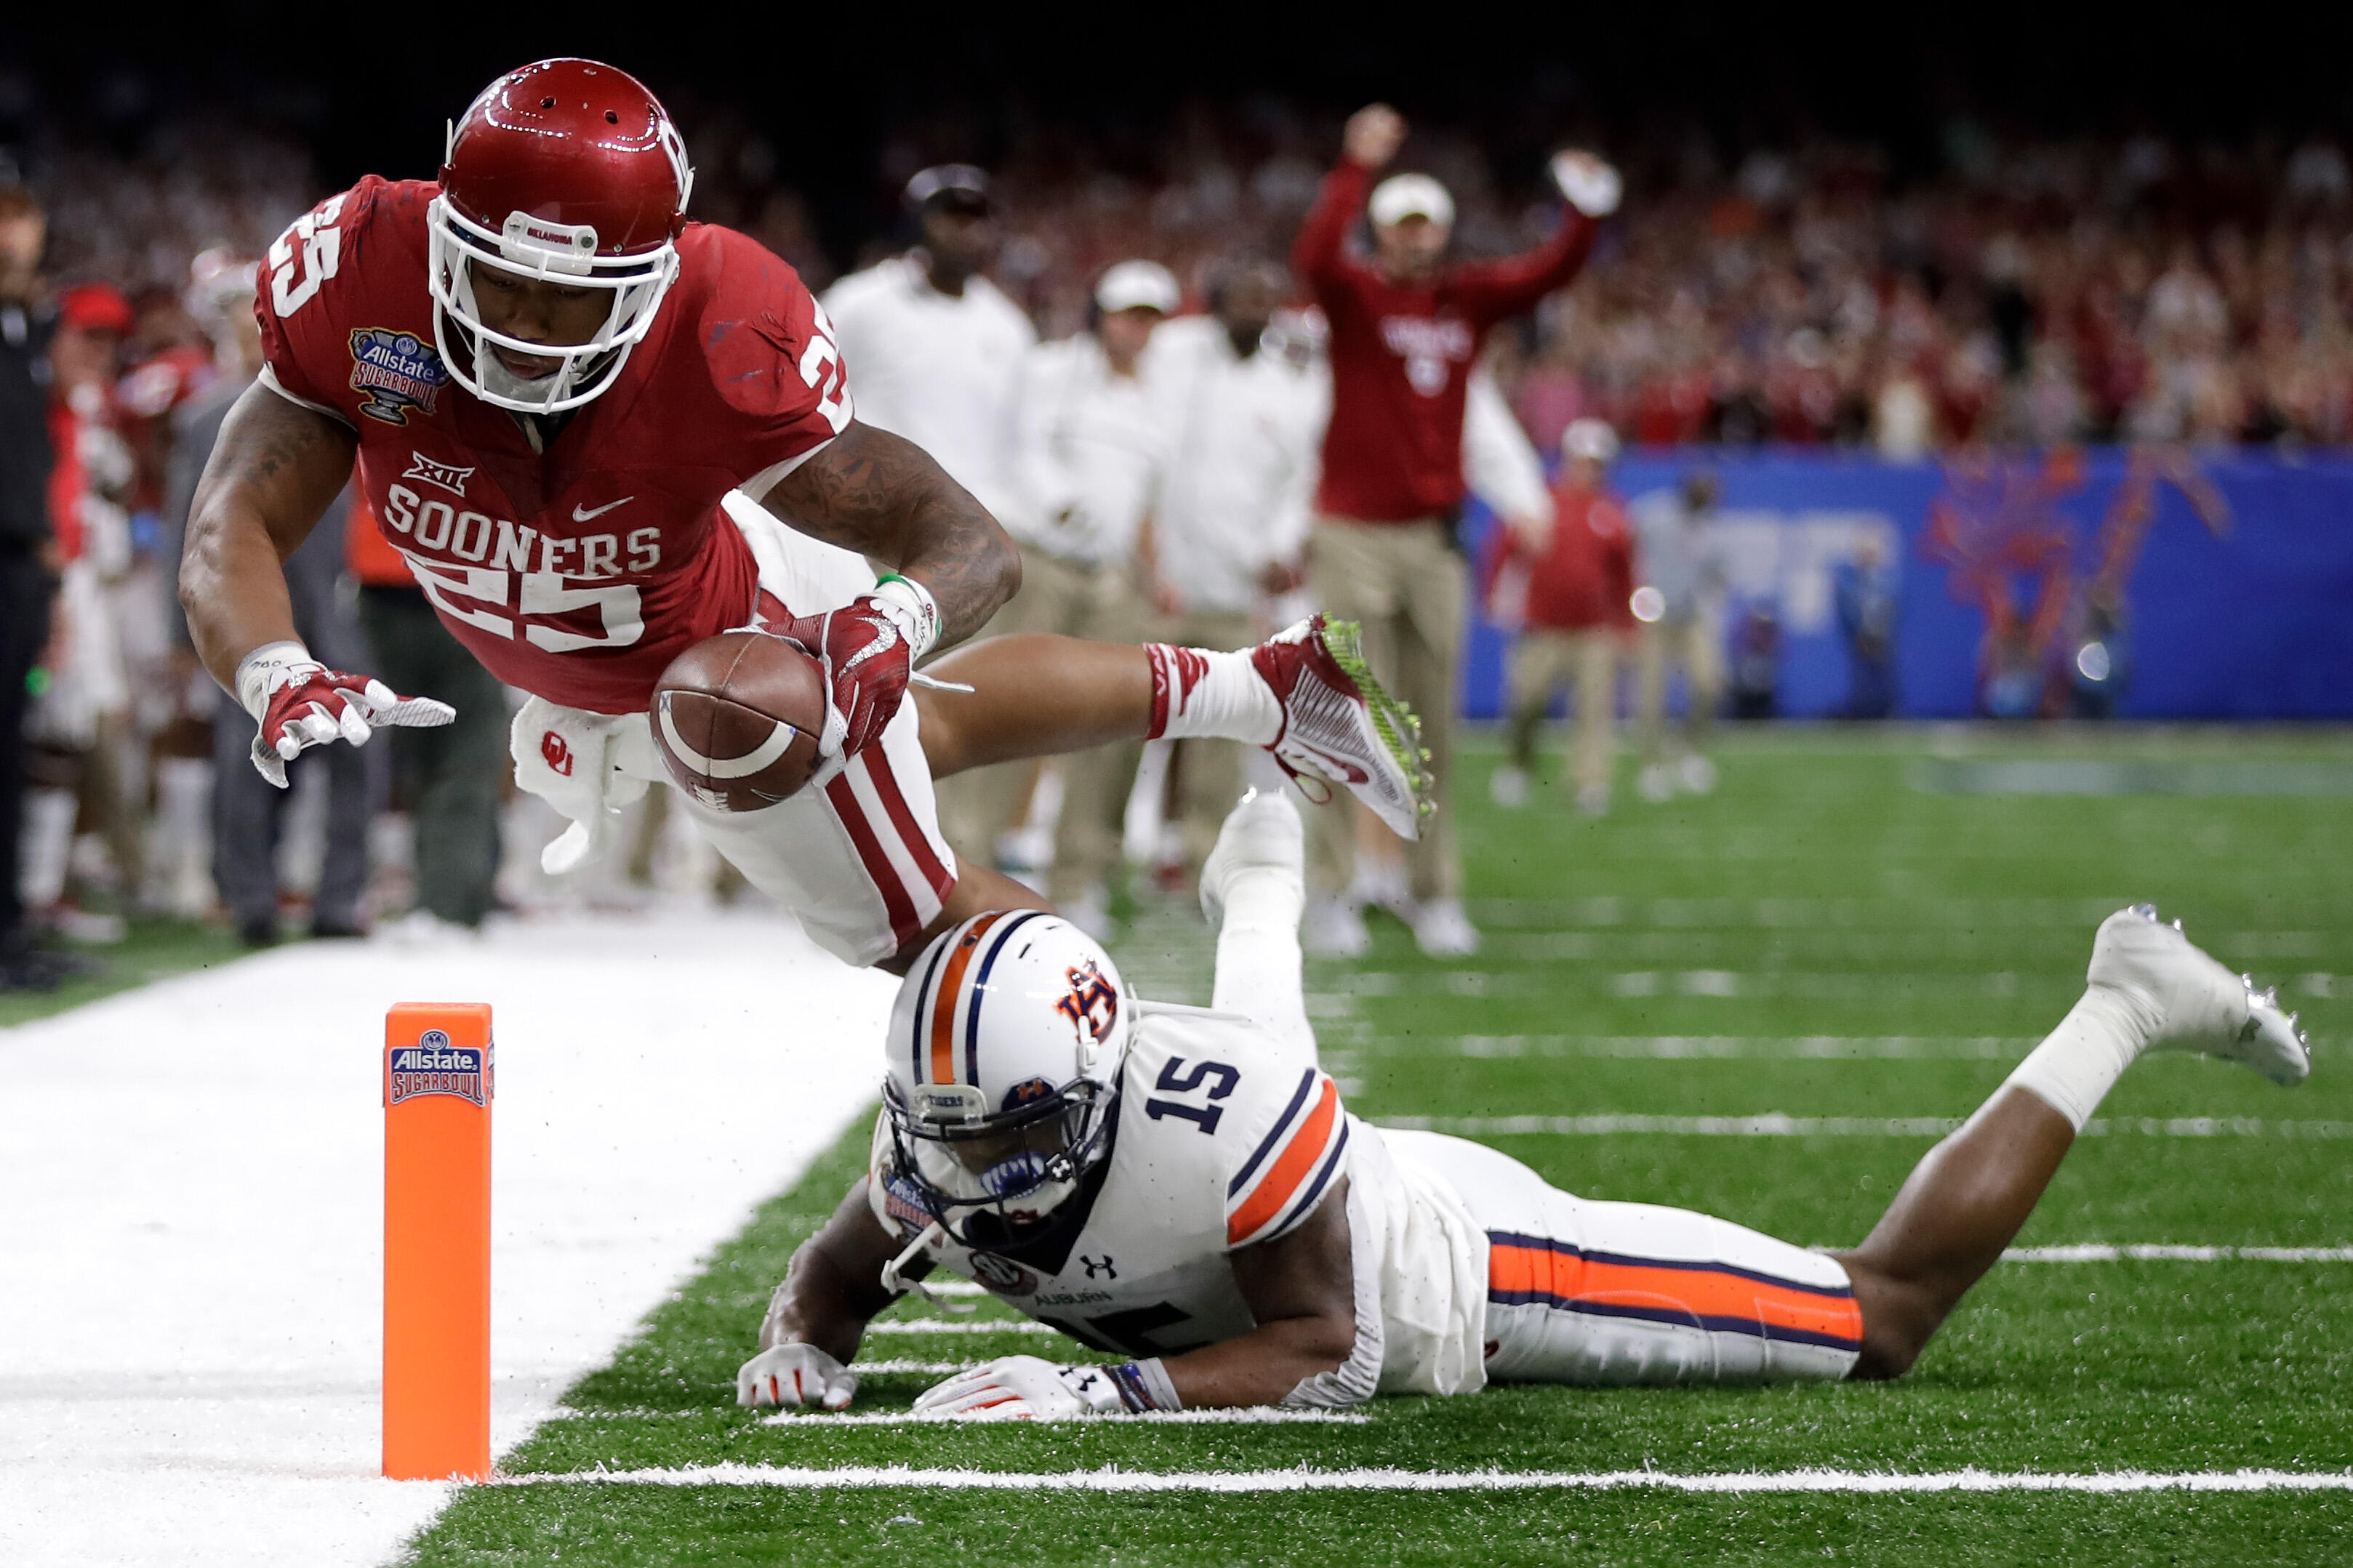 NEW ORLEANS, LA - JANUARY 02:  Joe Mixon #25 of the Oklahoma Sooners scores a touchdown over Joshua Holsey #15 of the Auburn Tigers during the Allstate Sugar Bowl at the Mercedes-Benz Superdome on January 2, 2017 in New Orleans, Louisiana.  (Photo by Sean